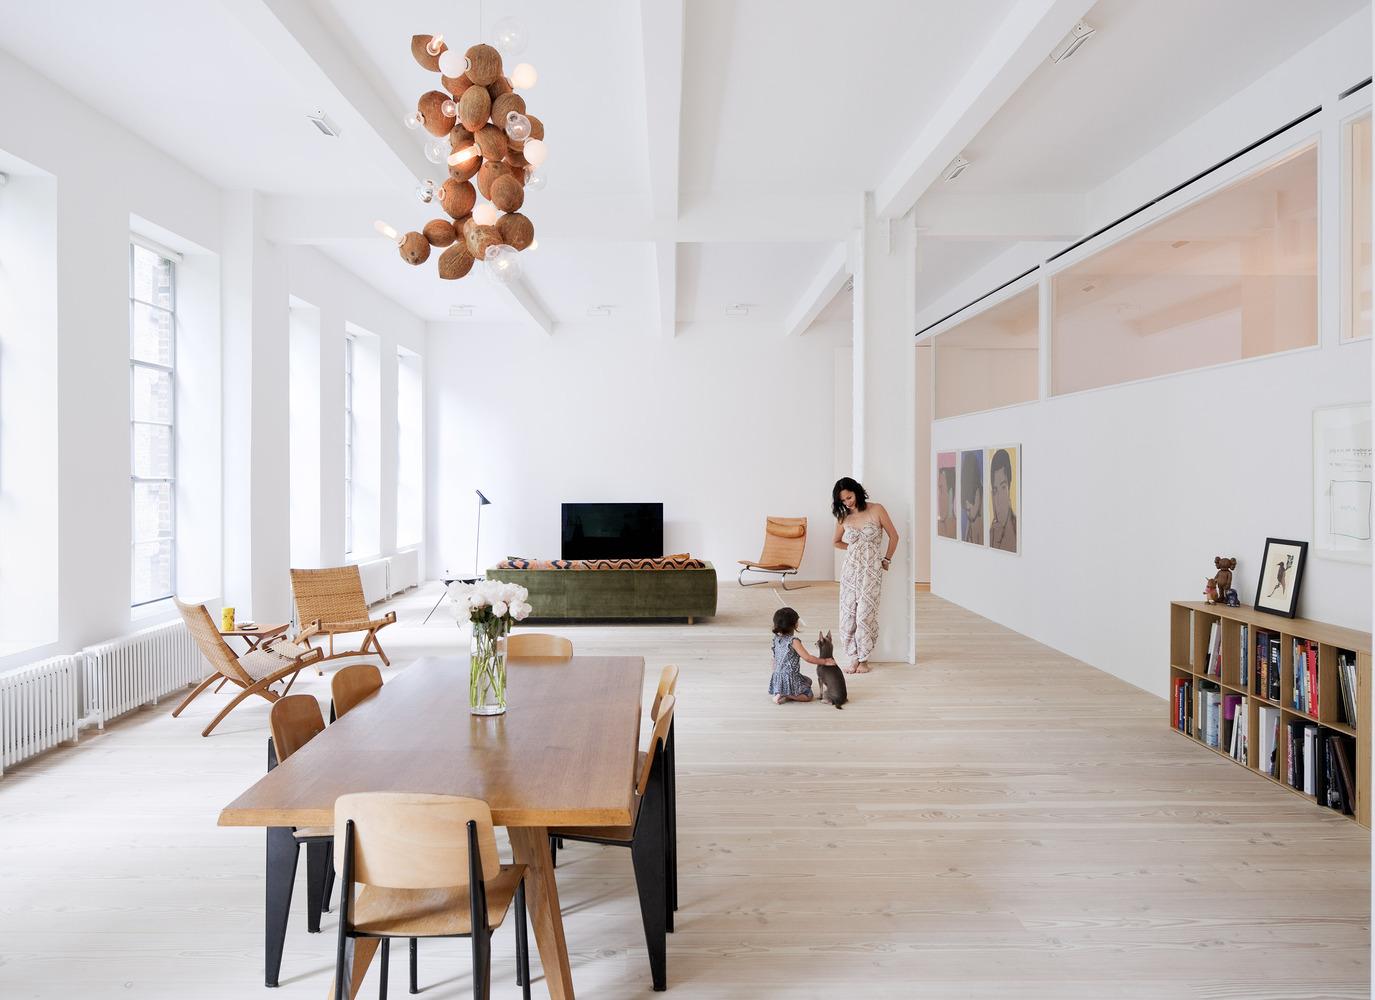 An Airy Art Studio-Turned-Family Home in New York City